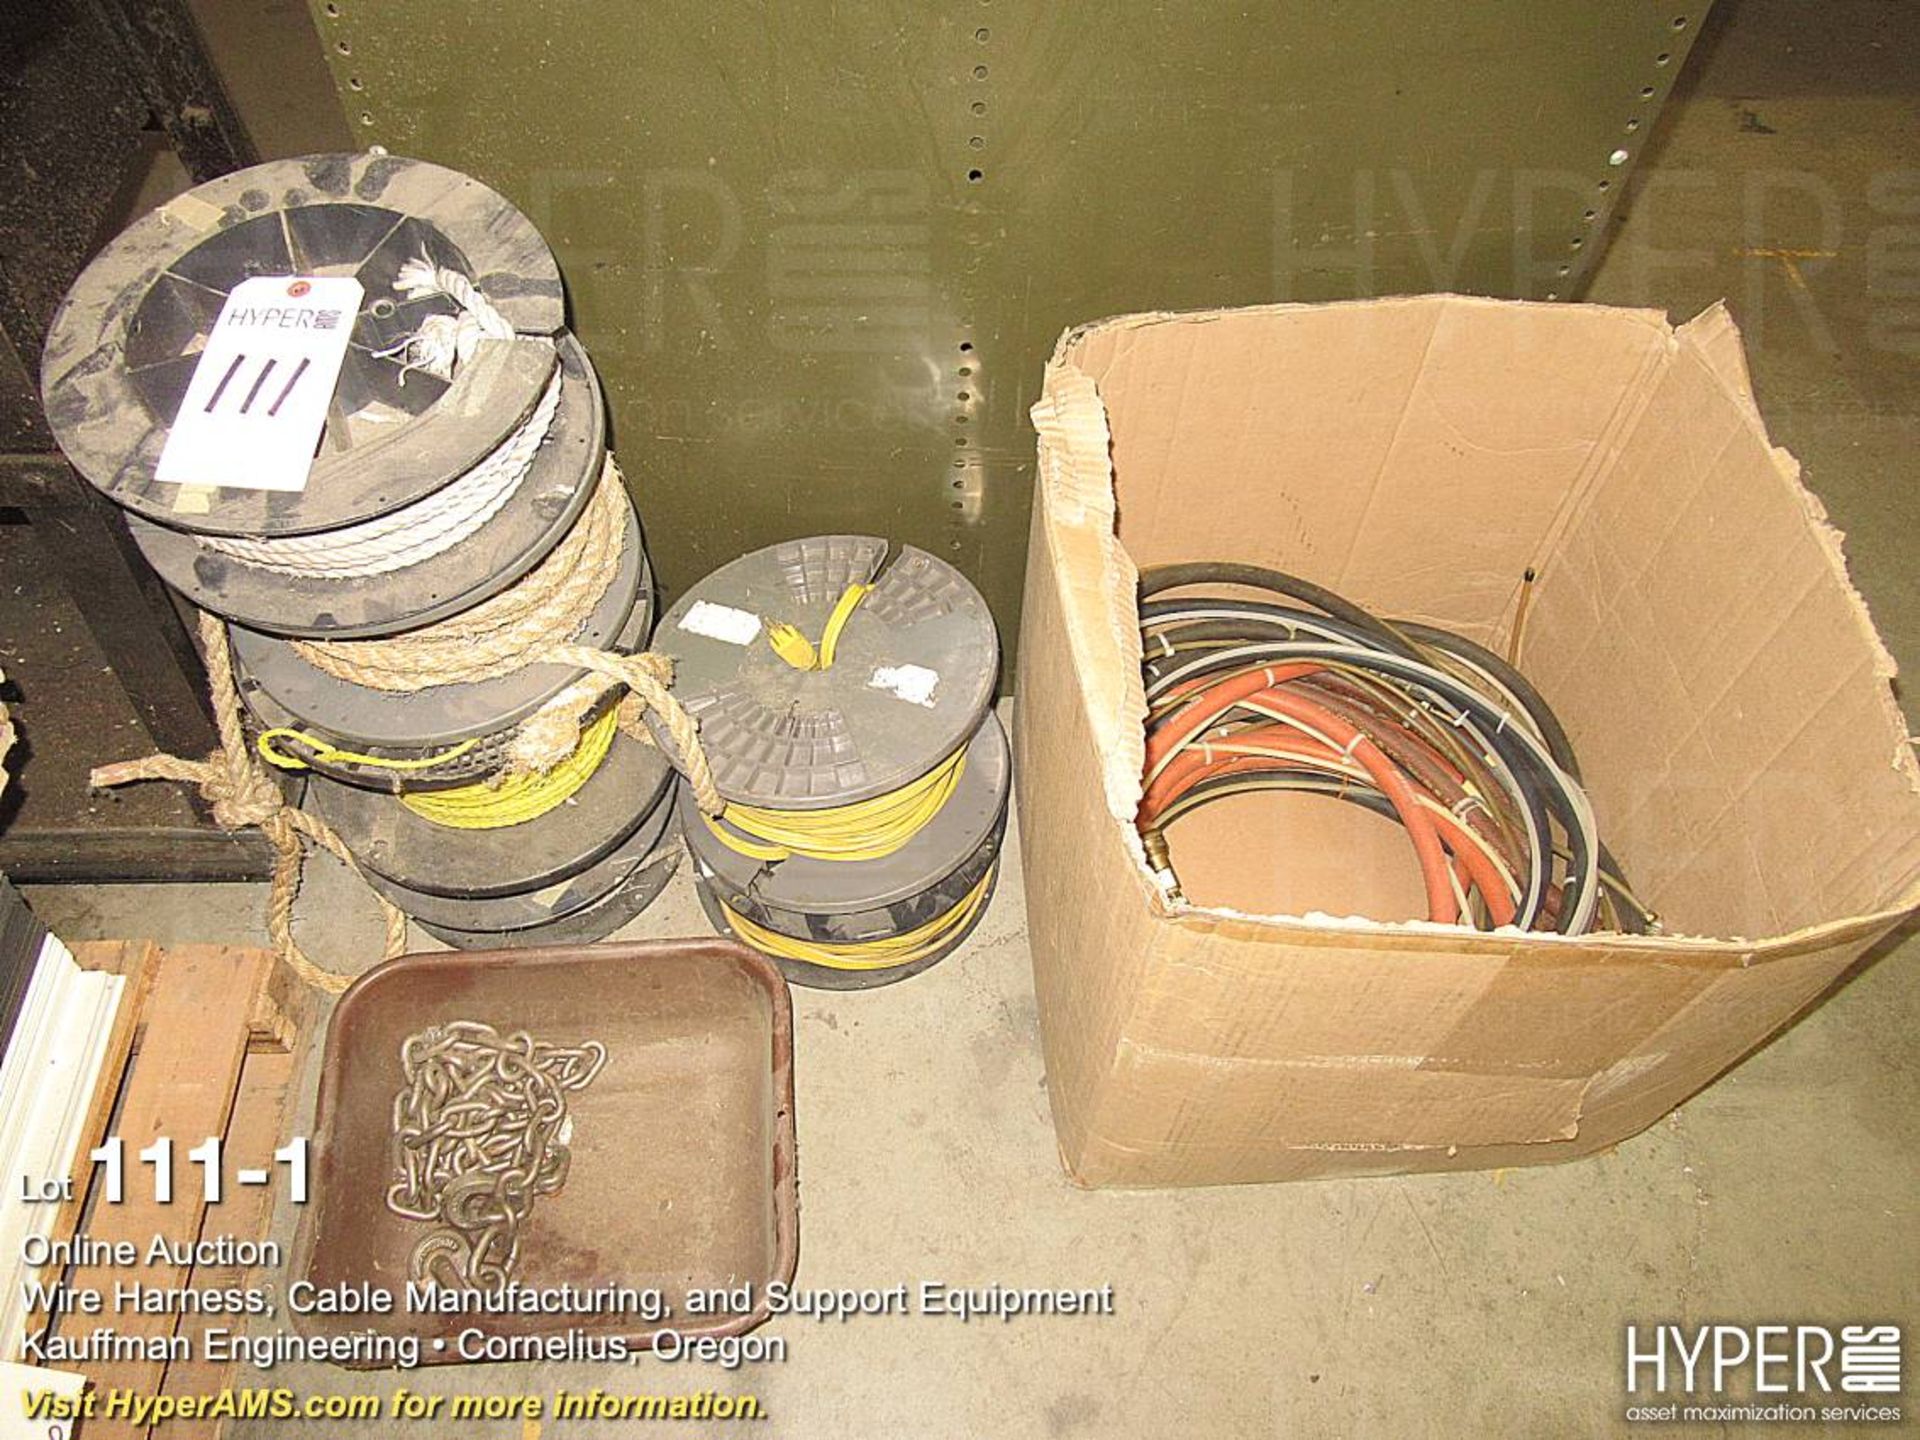 Assorted spools of rope, extension cords, jumper cables, and more